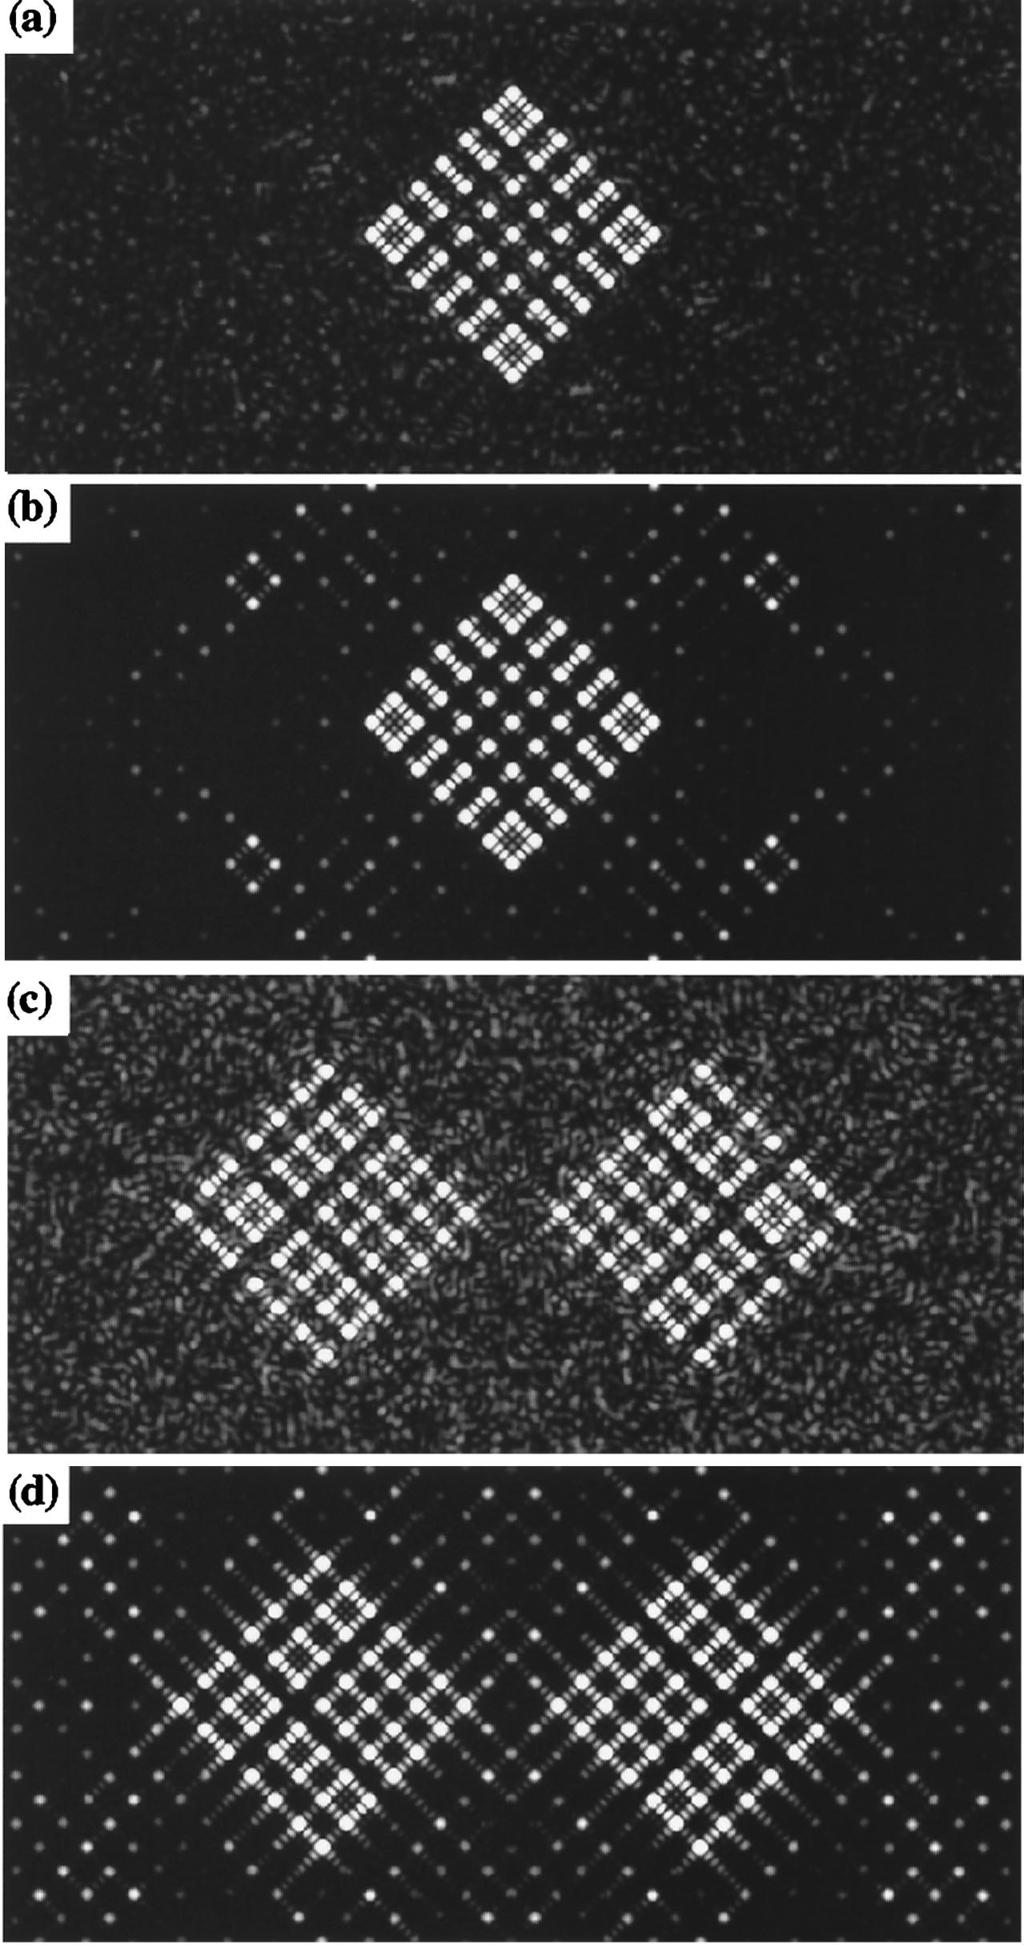 Fig. 3. Diffraction patterns for a MD-PRE for 1.1 and b MDE for 1.13 for the real-valued desired function and c mmd-pre for 1.05 and d MDE for 1.9 for the complex-valued desired function.